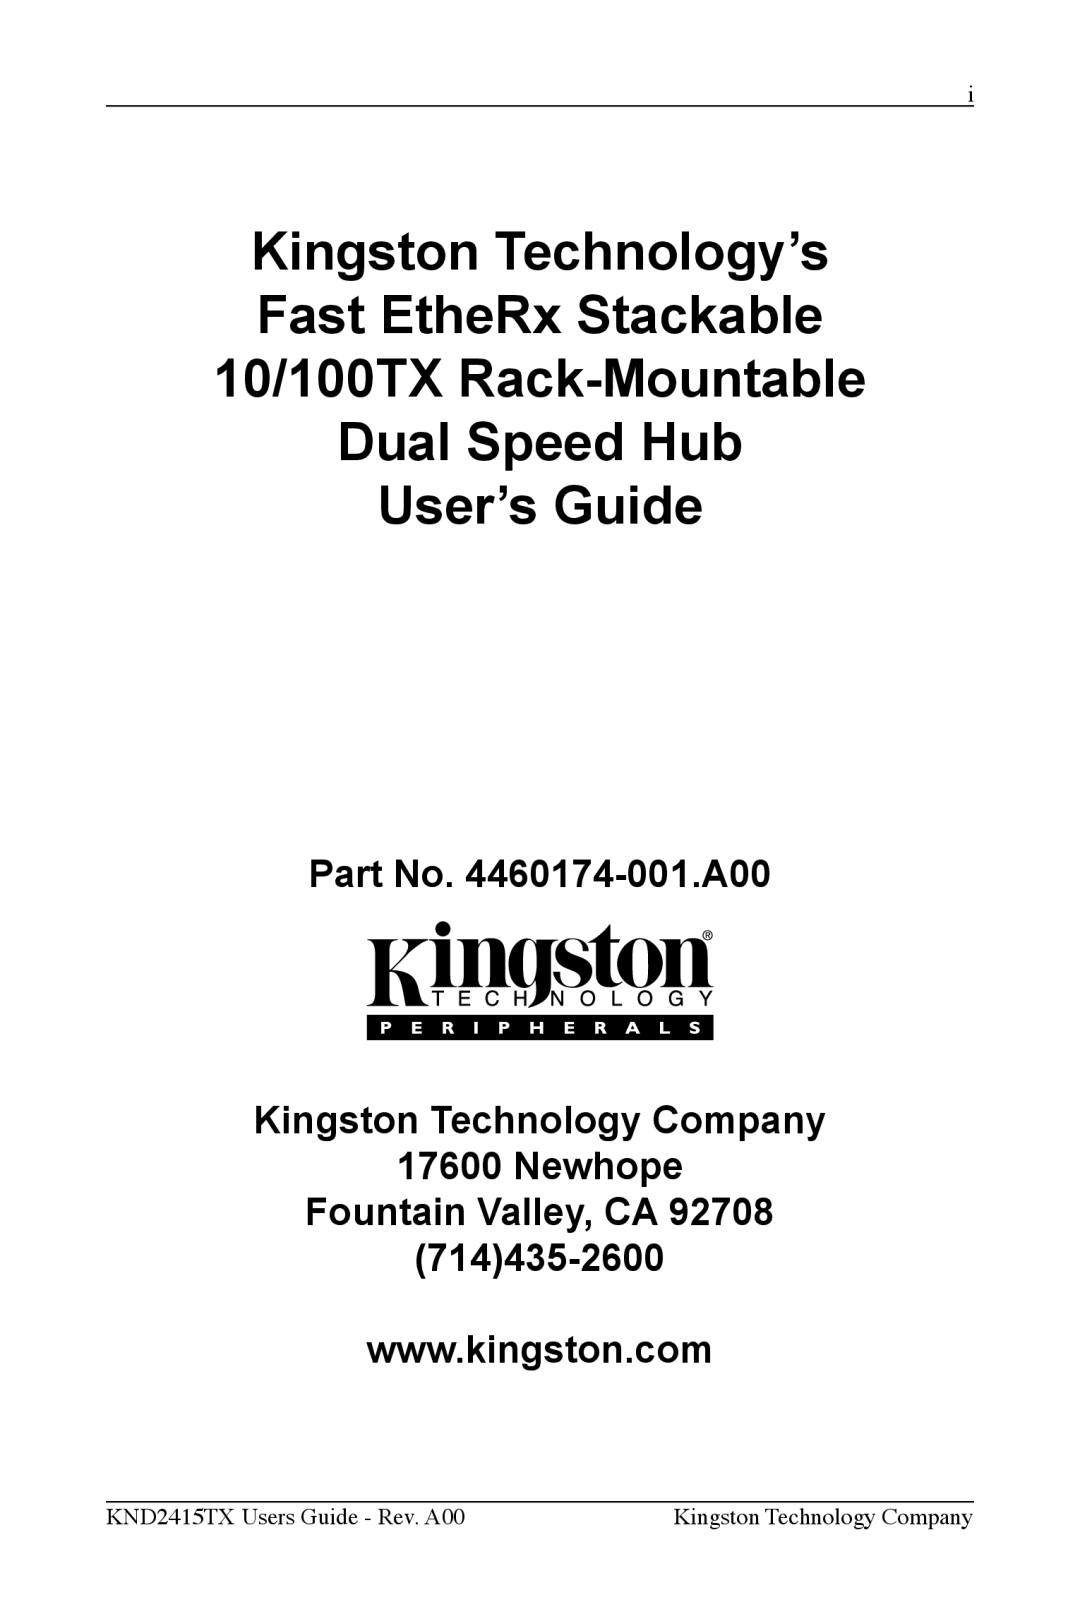 Kingston Technology KND2415TX Part No. 4460174-001.A00 Kingston Technology Company 17600 Newhope, Fountain Valley, CA 